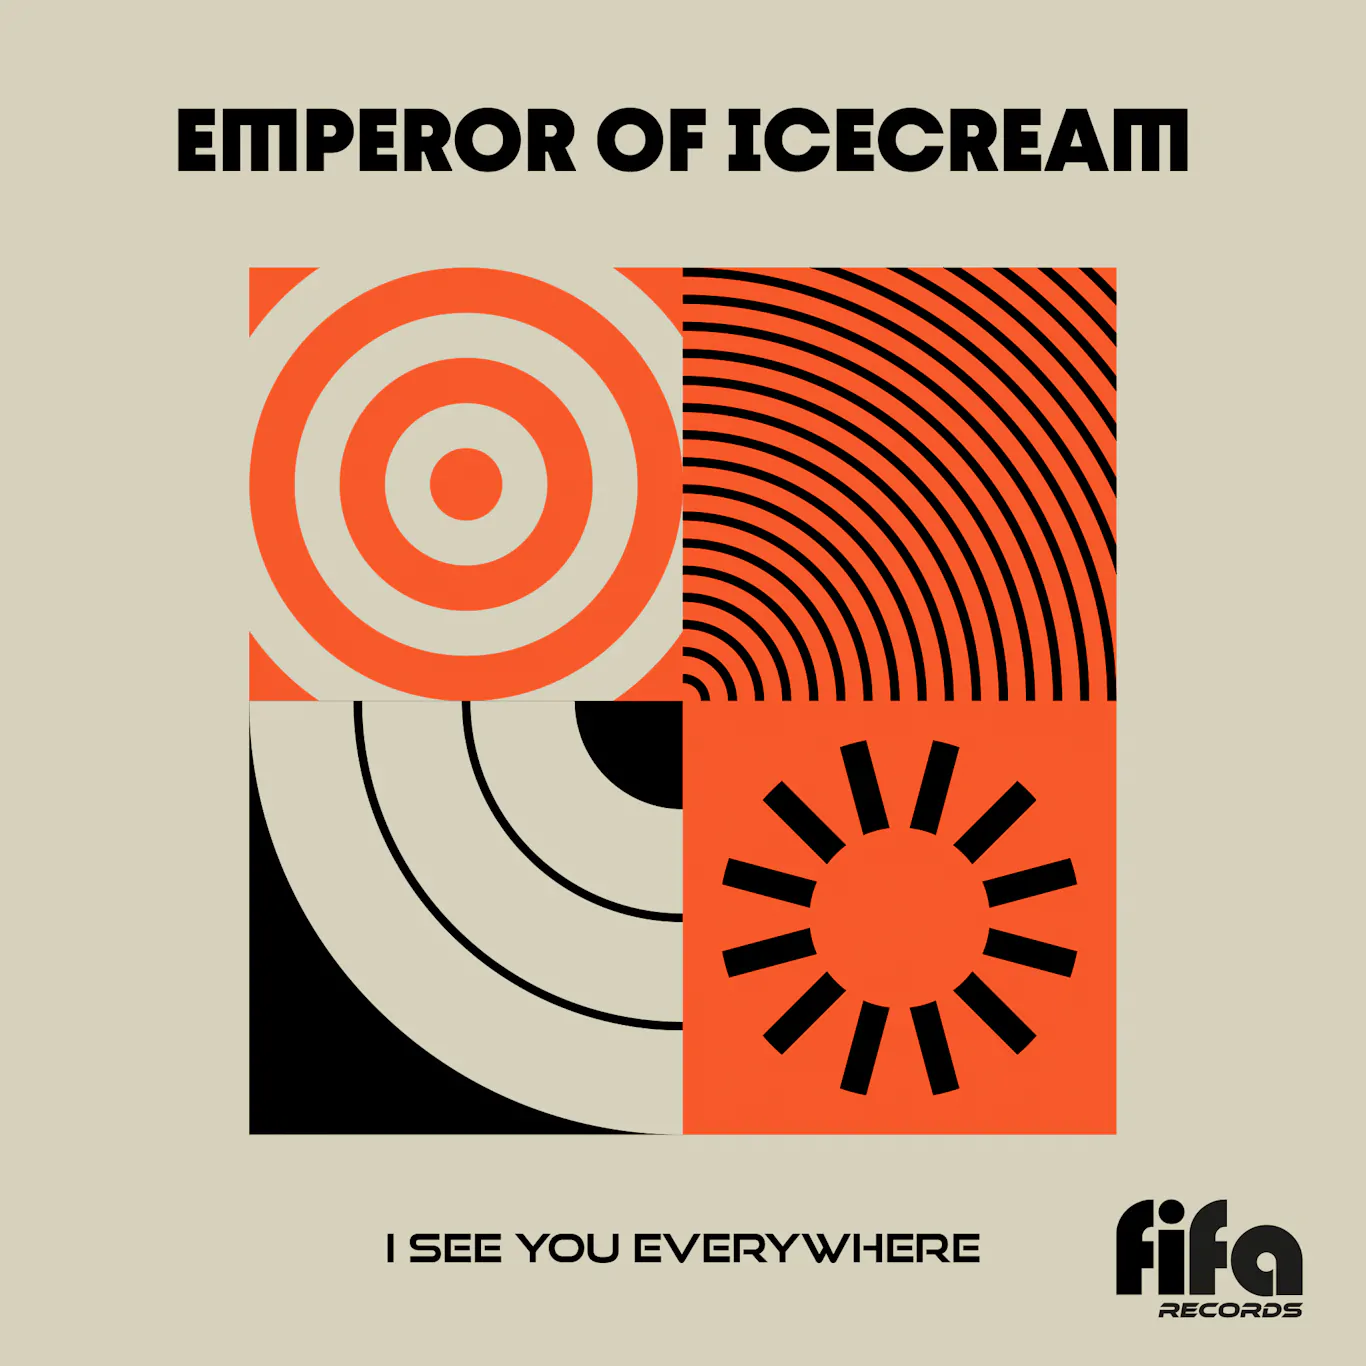 EMPEROR OF ICE CREAM release the video for new single ‘I See You Everywhere’